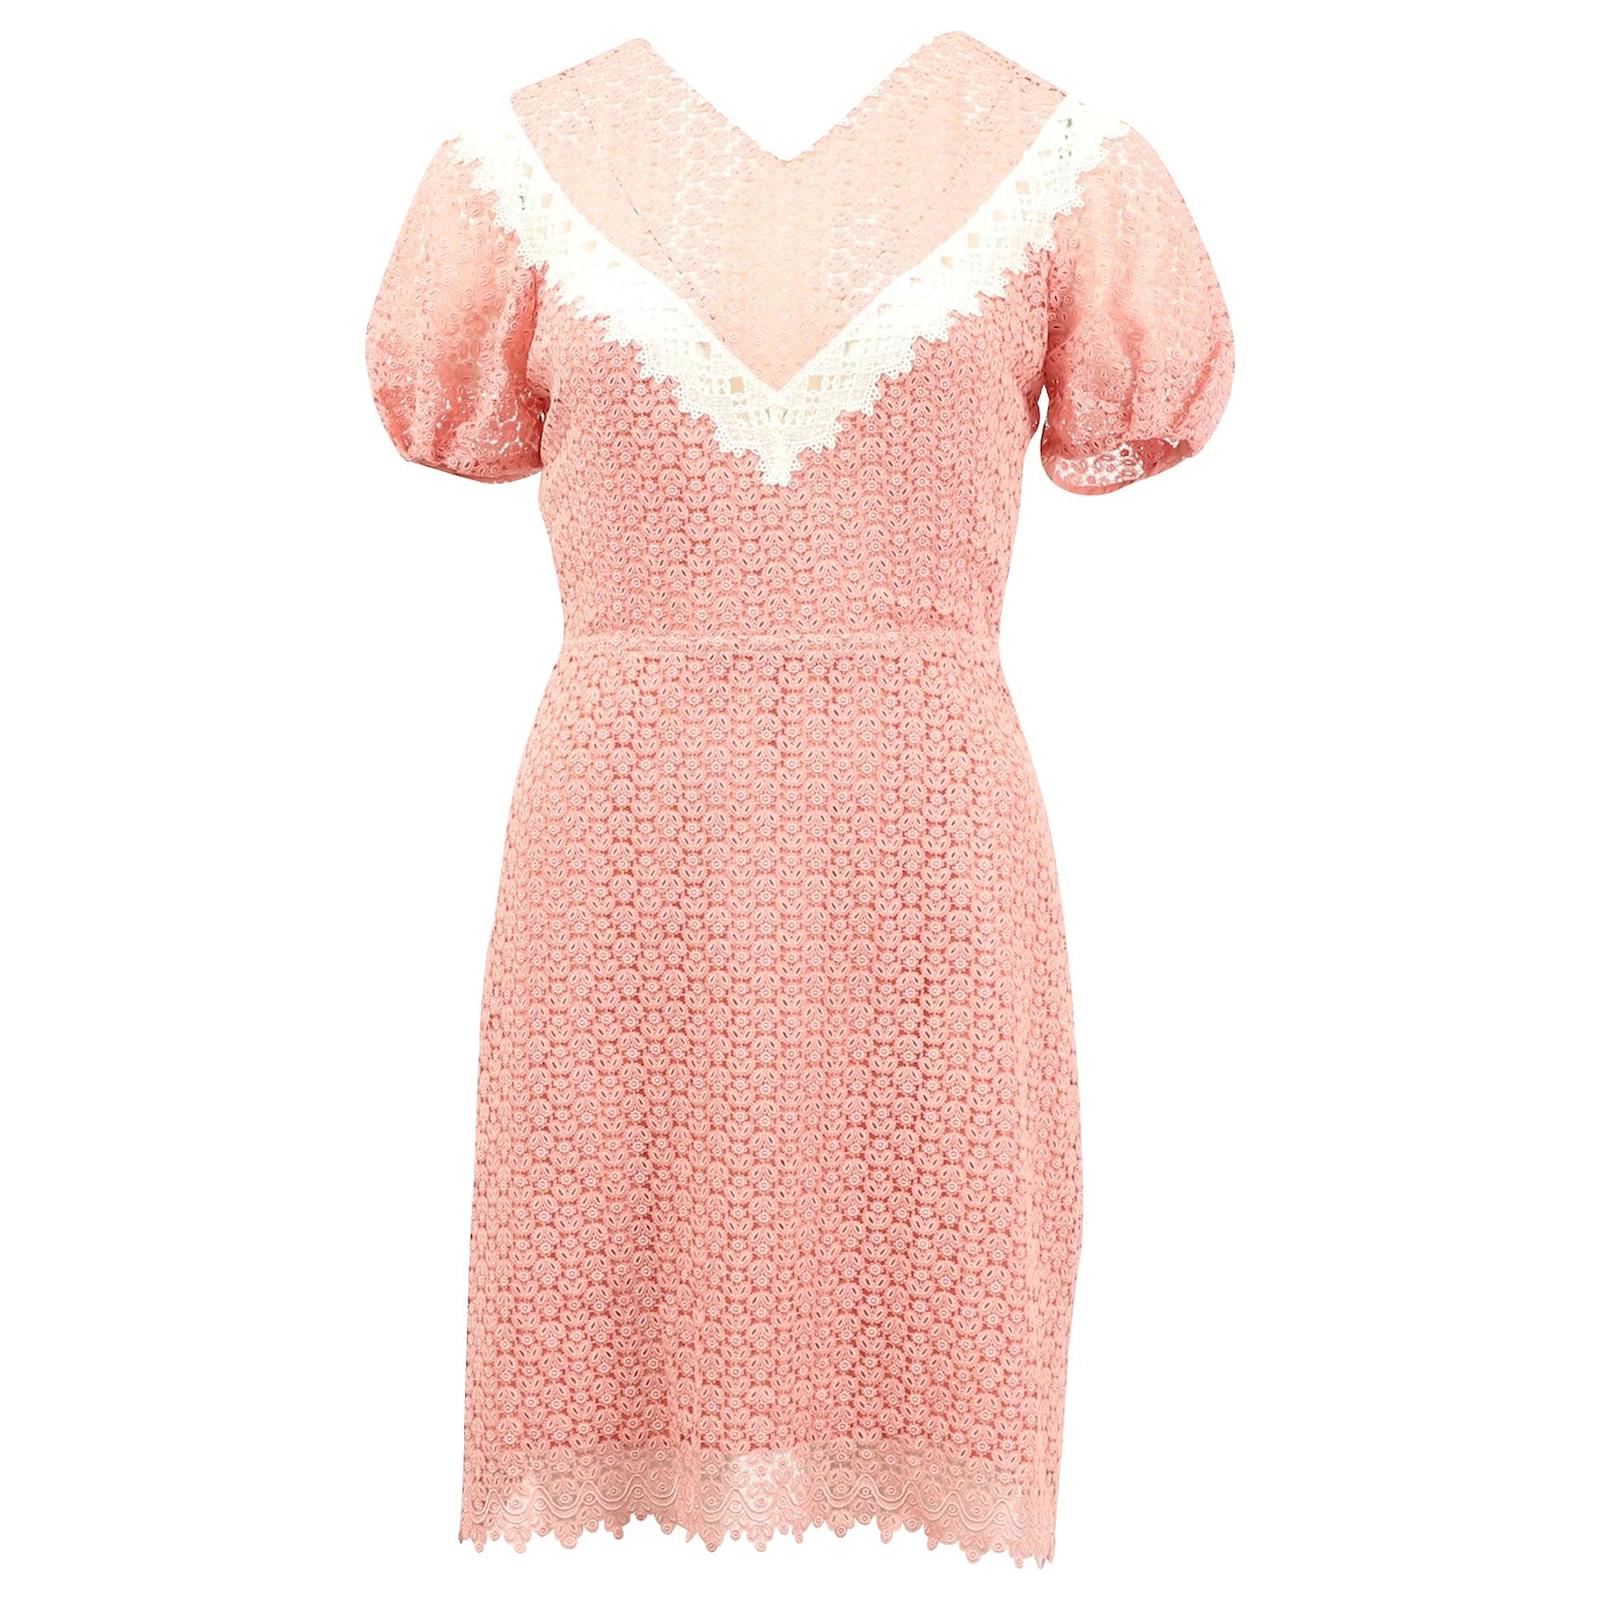 Sandro Paris Gavin Two-Tone Puff Sleeve Lace Dress in Pink